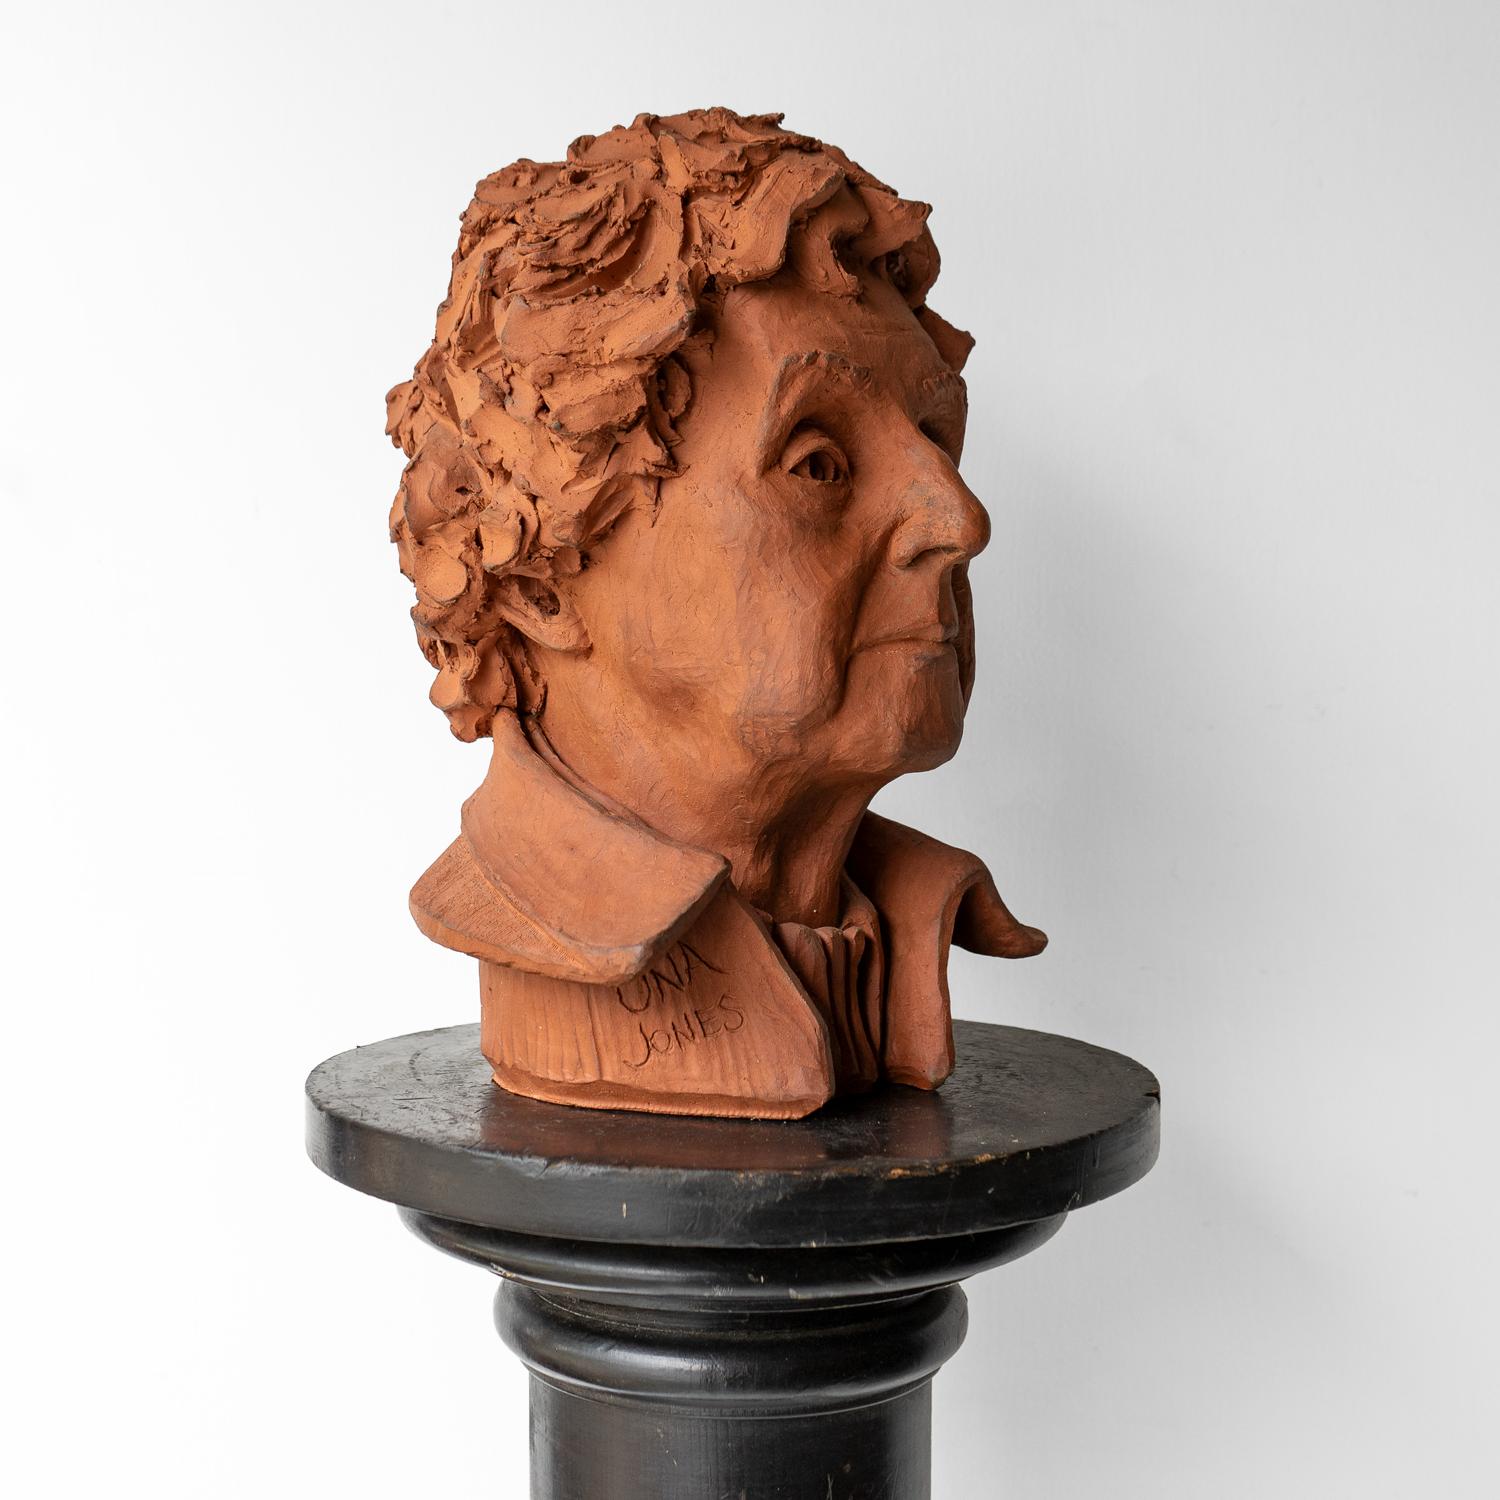 Hand-Crafted Vintage Ceramic Terracotta Portrait Bust Sculpture, Late 20th Century For Sale